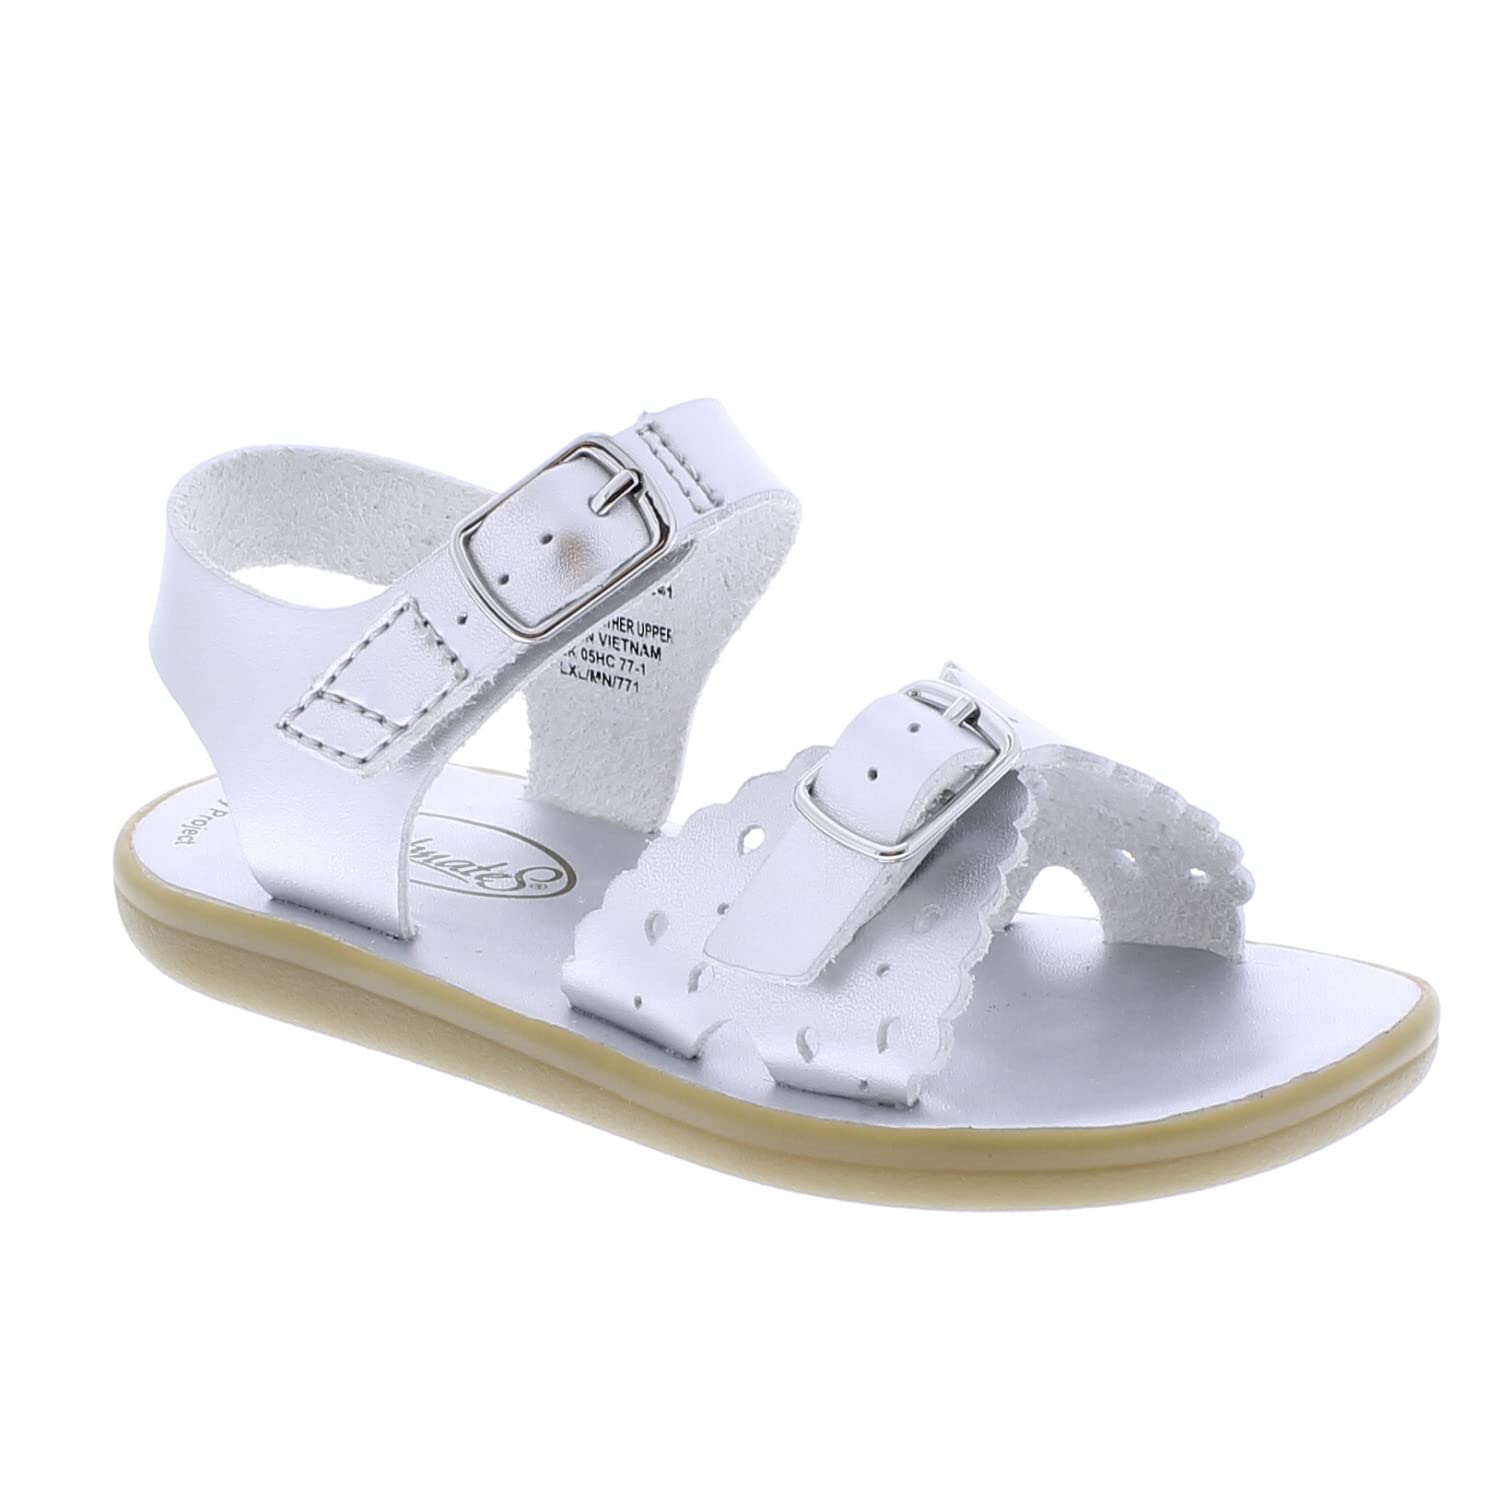 FOOTMATES Ariel and Eco-Ariel Waterproof Sandals for Girls and Boys with Slip-Resistant, Non-Marking Outsoles and Strap Closure for Infants, Toddlers, and Kids Ages 0-12